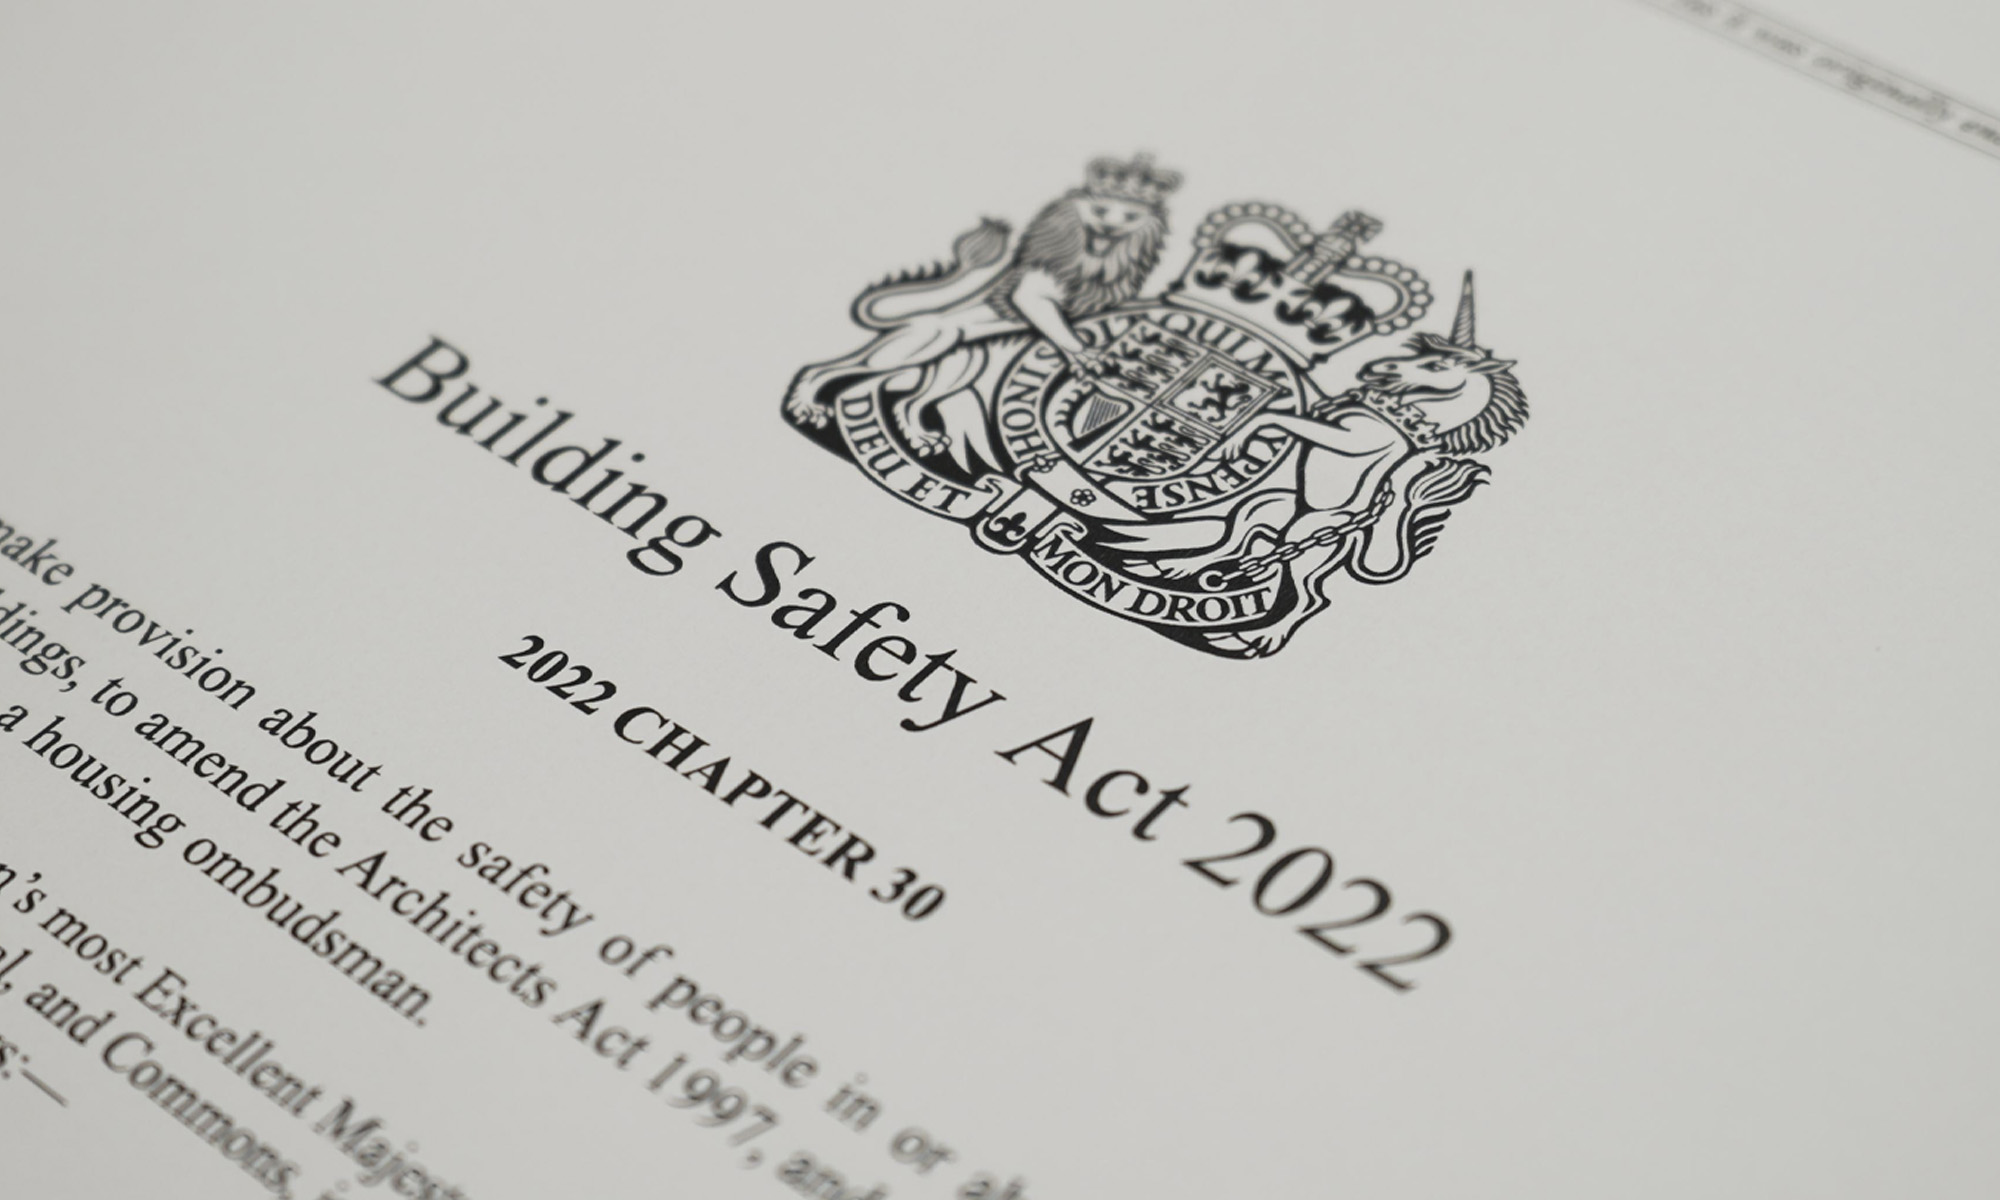 Building safety act 2